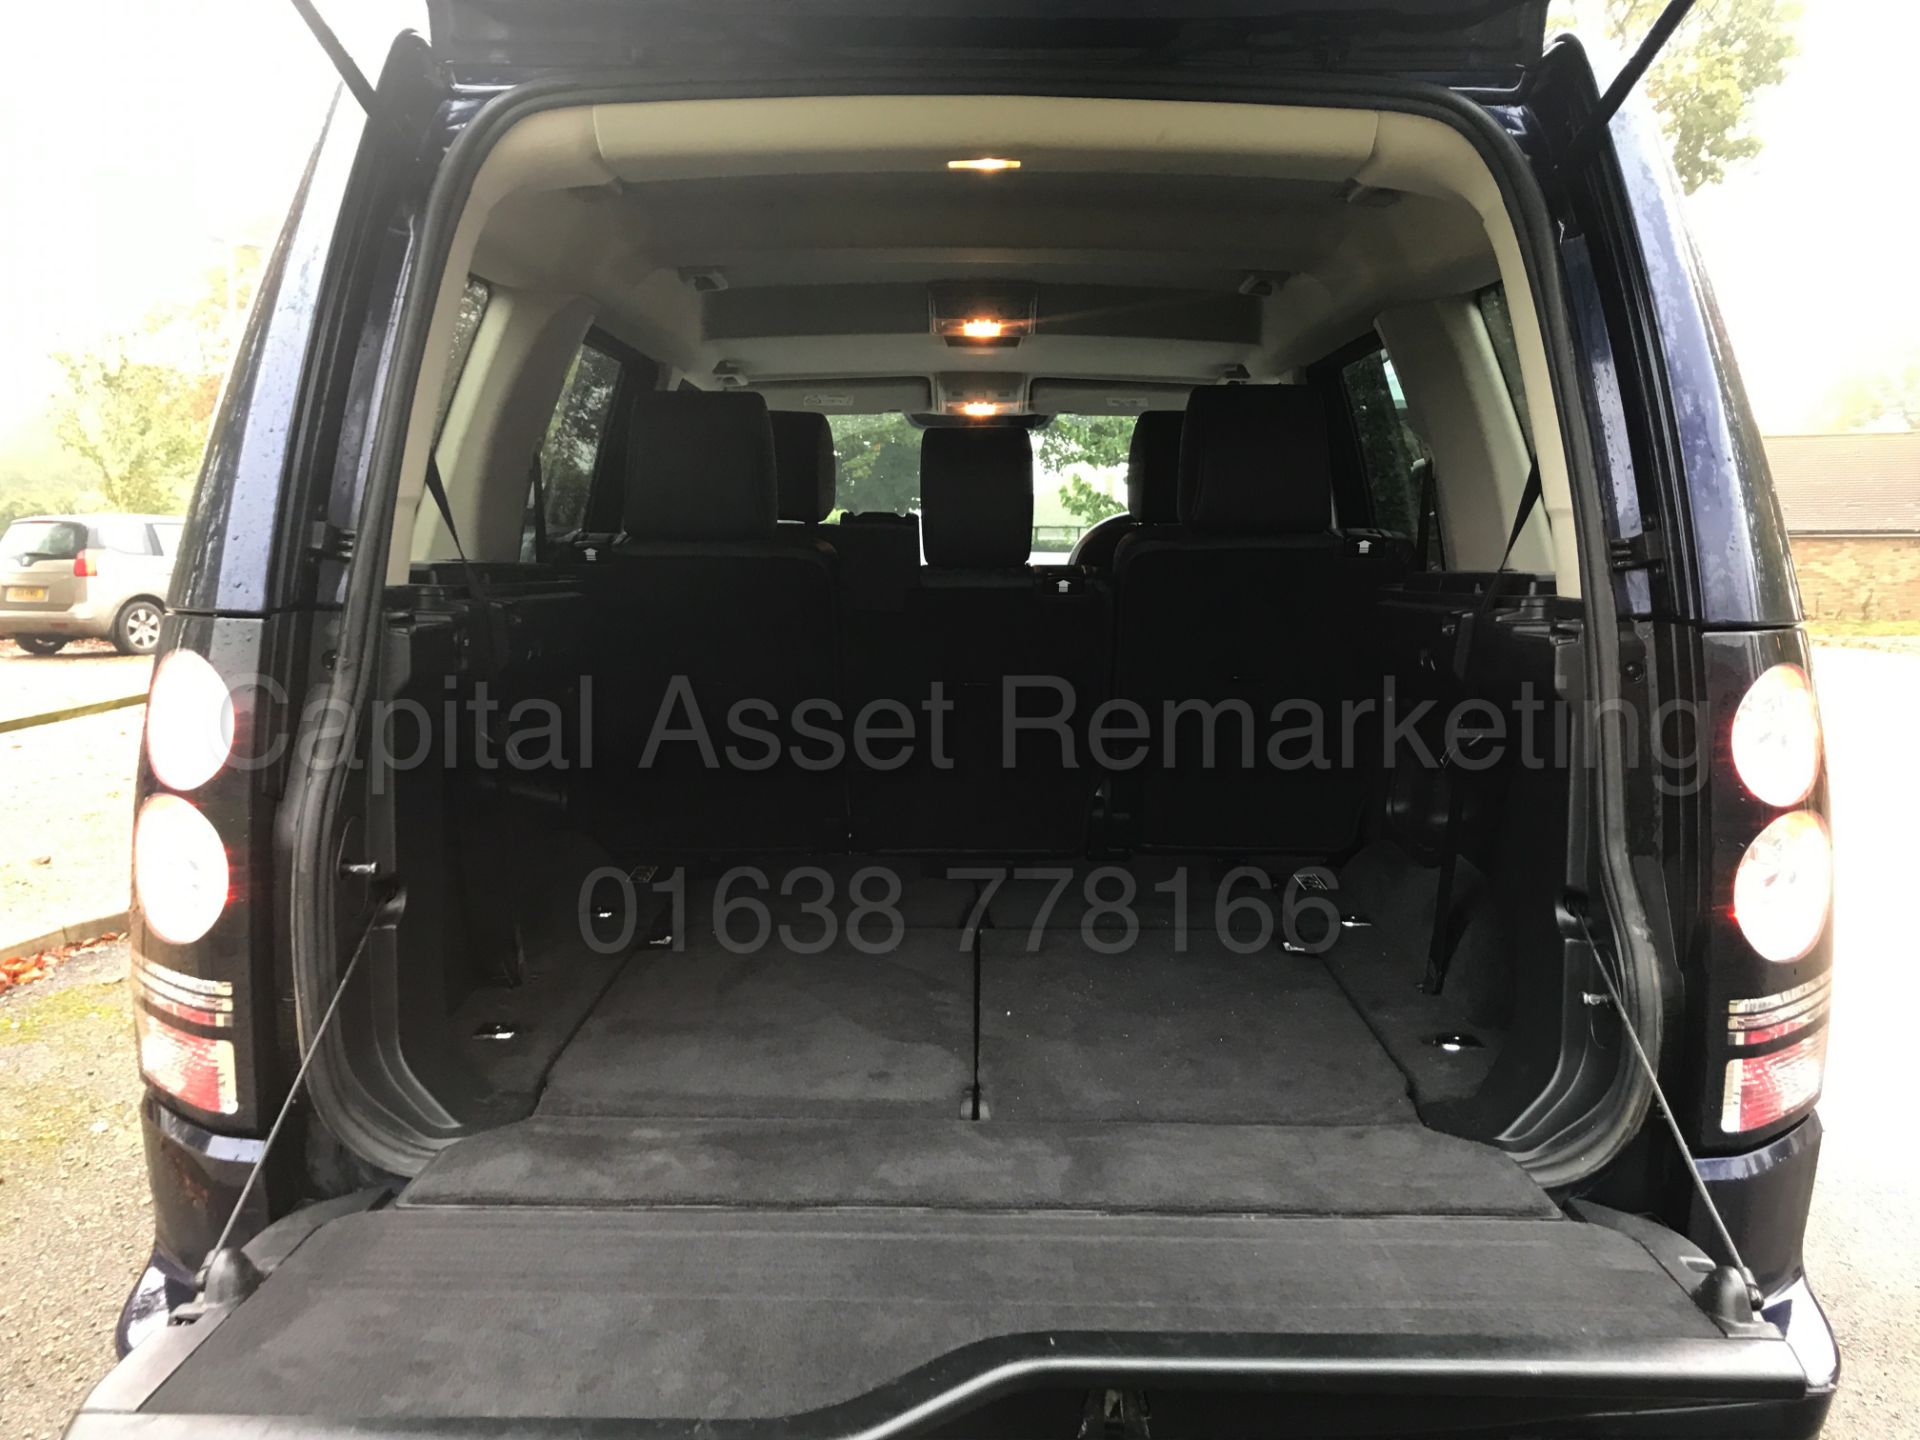 ON SALE LAND ROVER DISCOVERY 4 (2014) '3.0 SDV6 - 8 SPEED AUTO - LEATHER - SAT NAV -7 SEATER'1 OWNER - Image 20 of 41